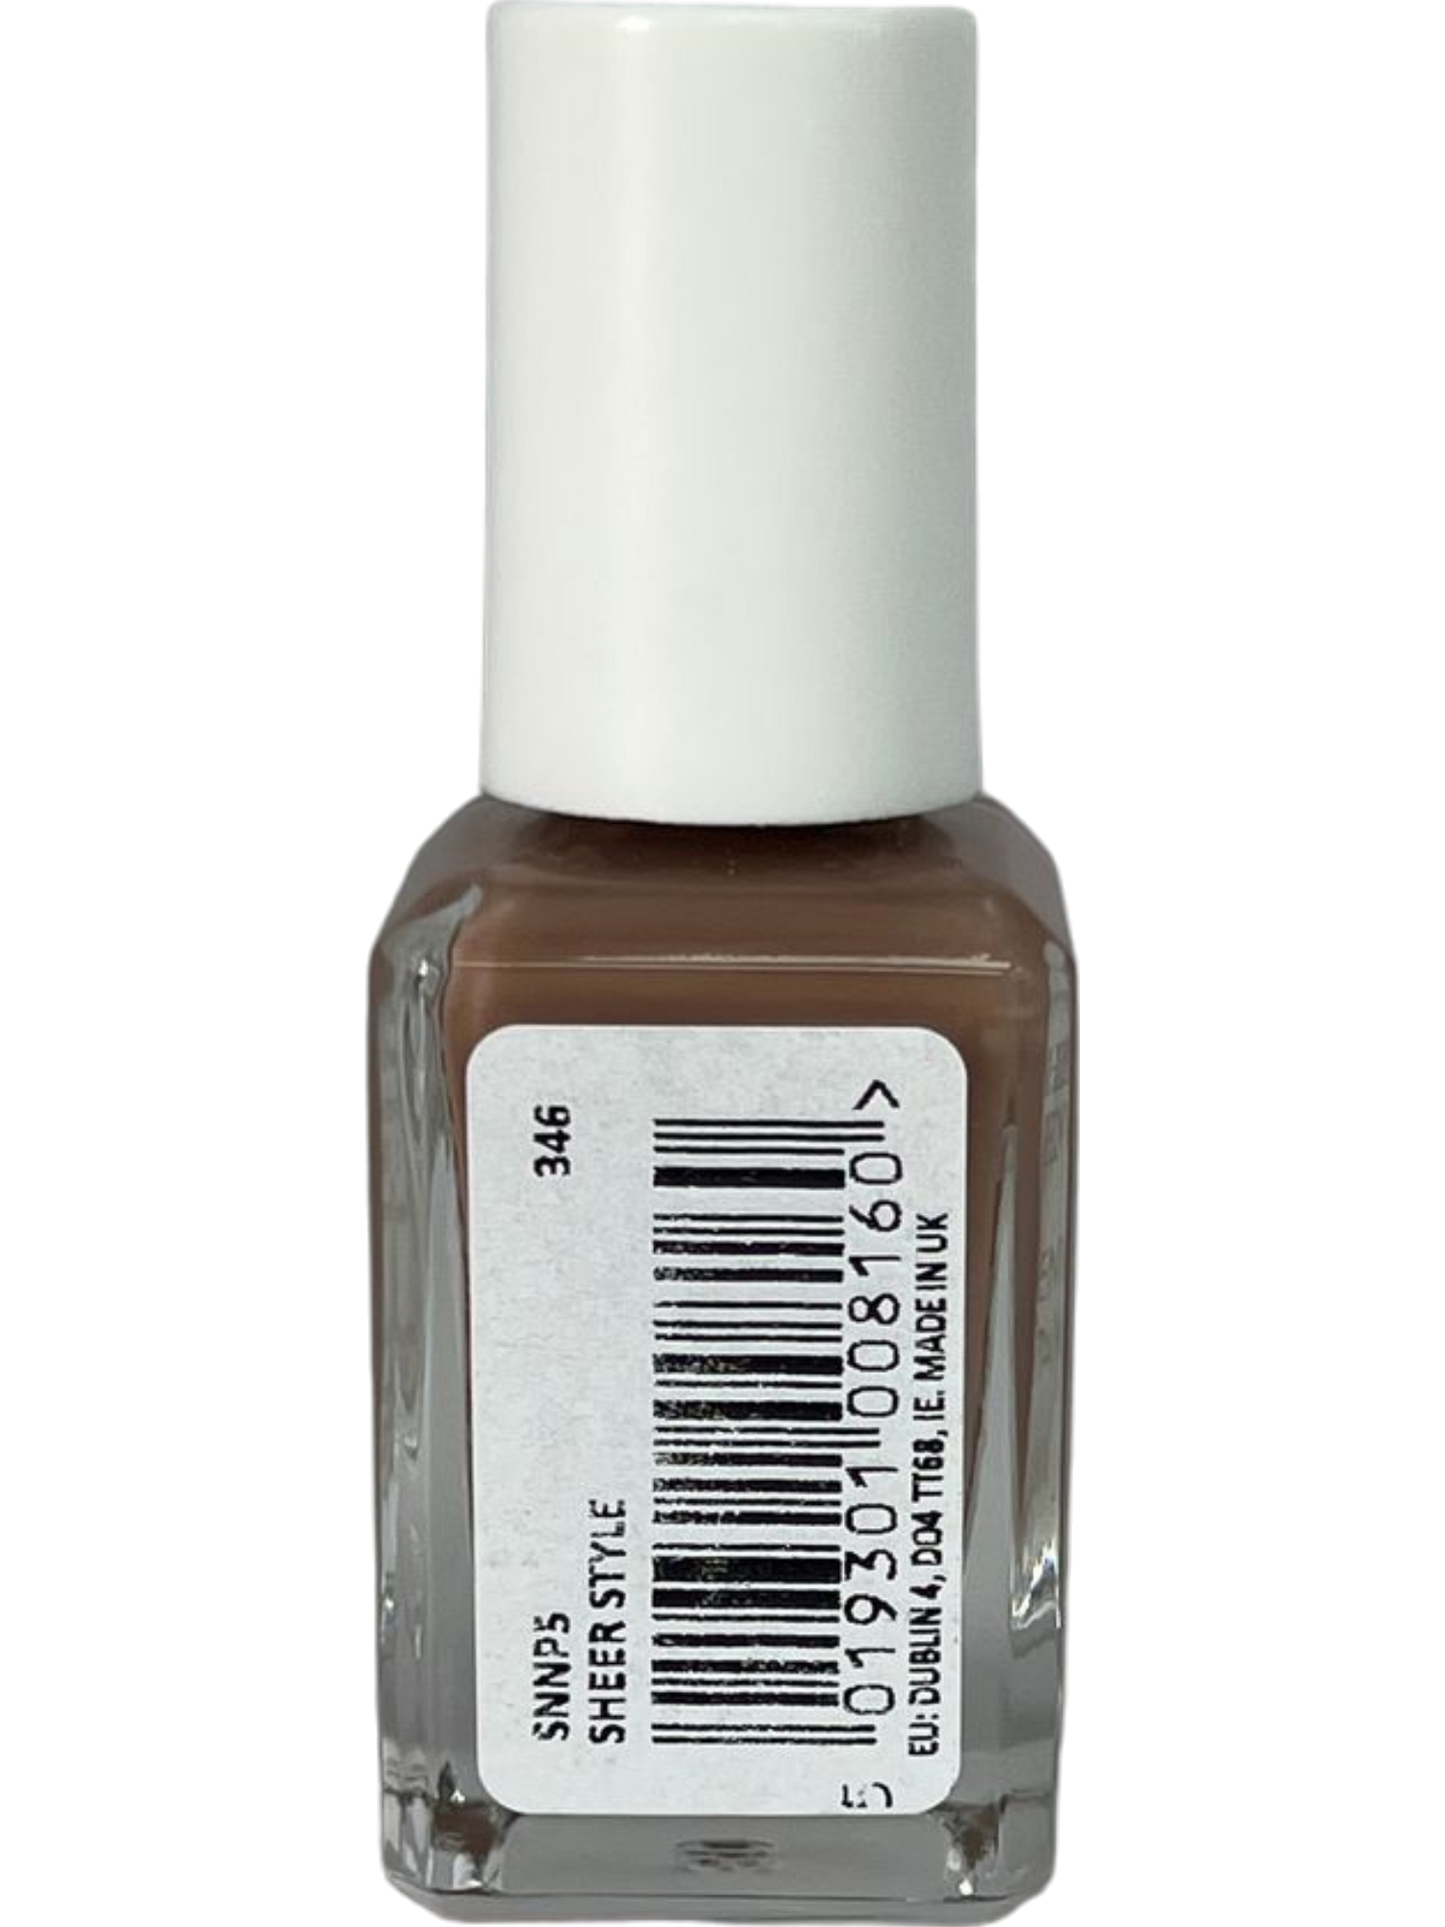 Barry M Nude Sheer Strength Hardening Nail Paint